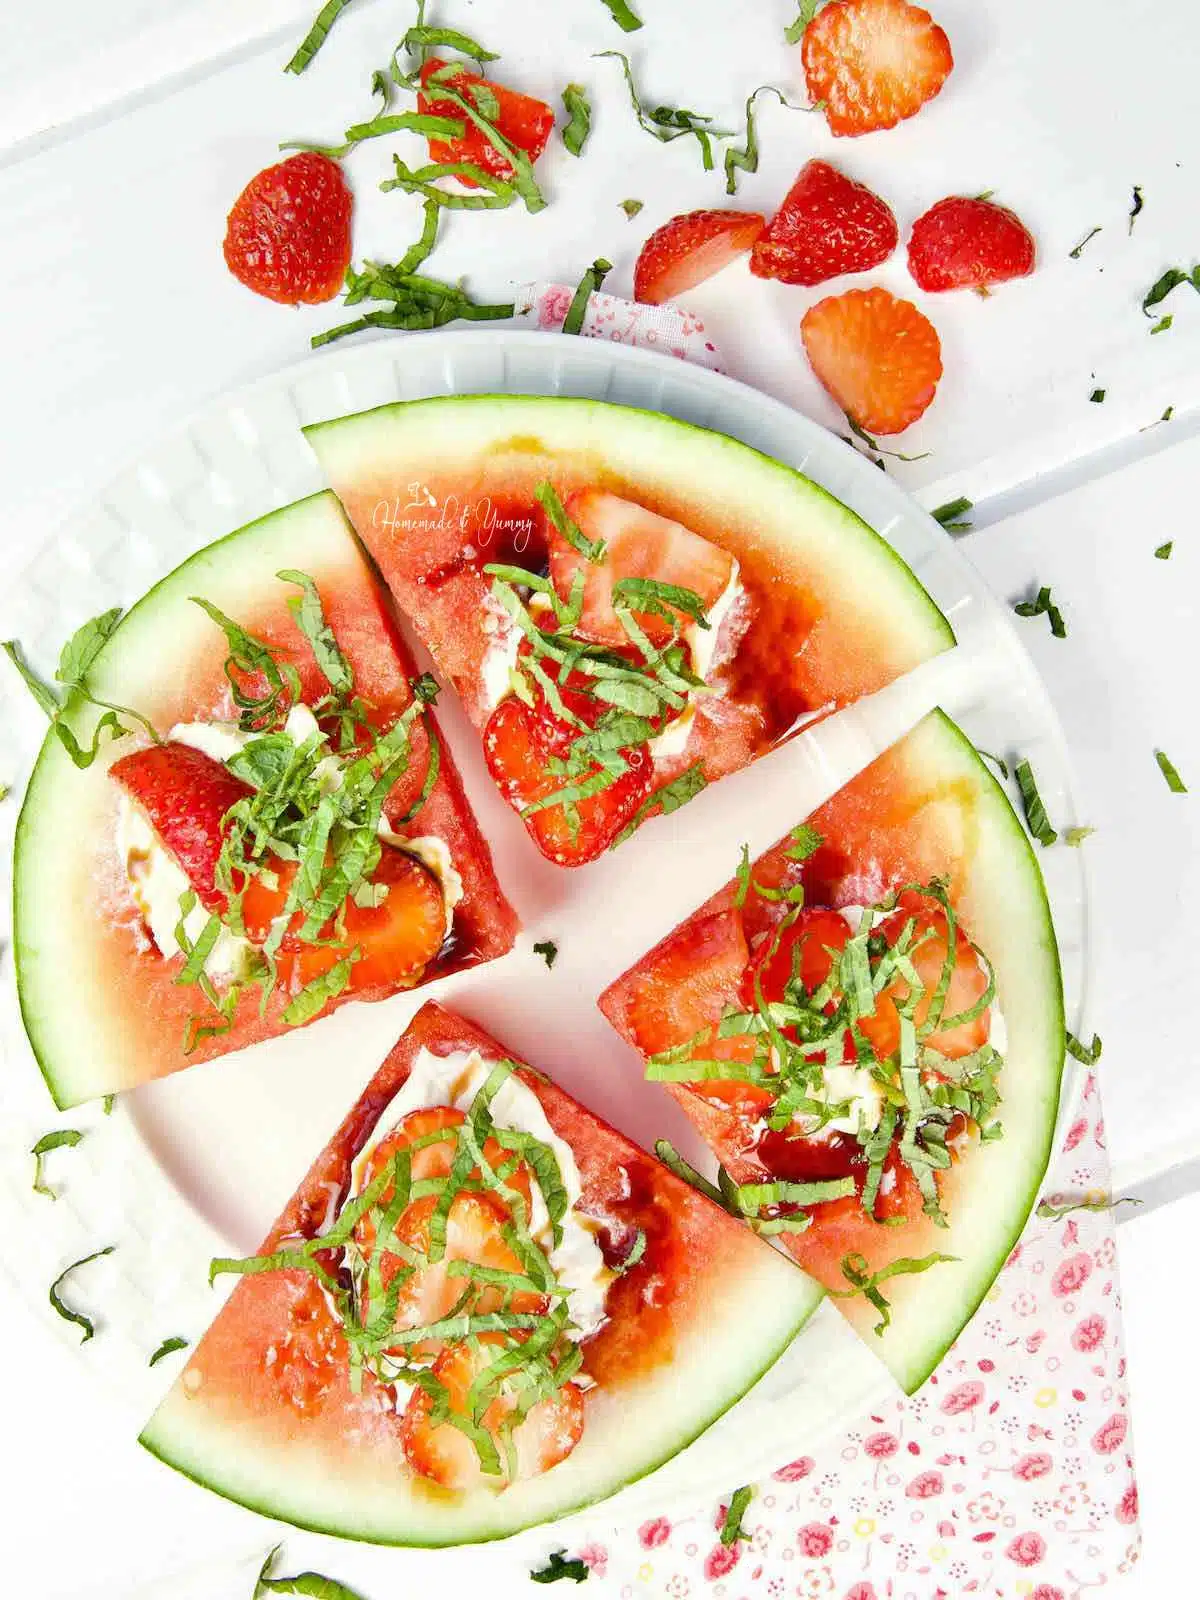 Watermelon Pizza with ricotta cheese, strawberries, balsamic and basil.